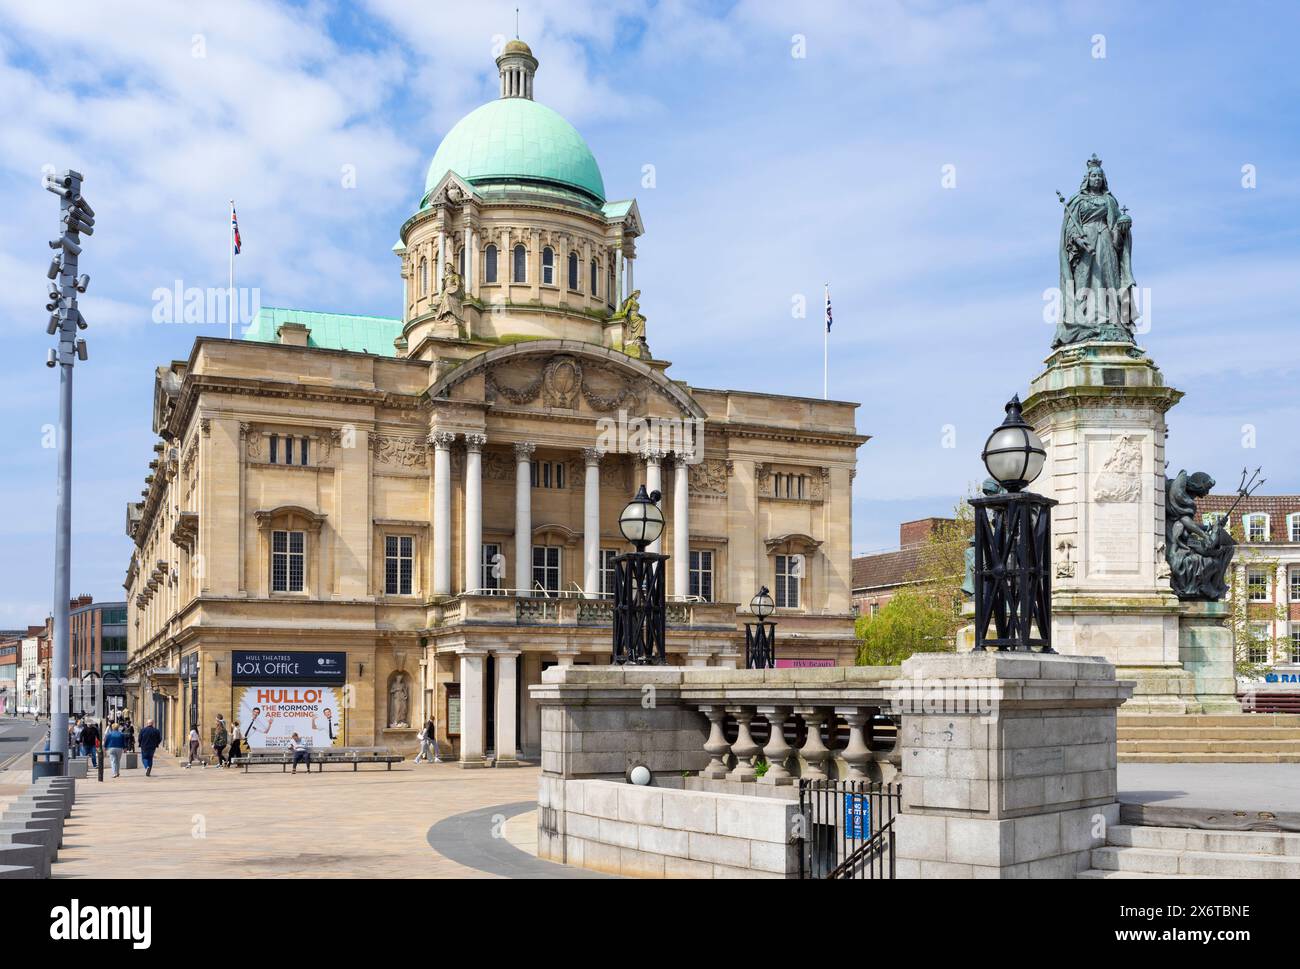 Hull City Hall in Queen Victoria Square with Queen Victoria Statue Kingston upon Hull Yorkshire England UK GB Europe Stock Photo